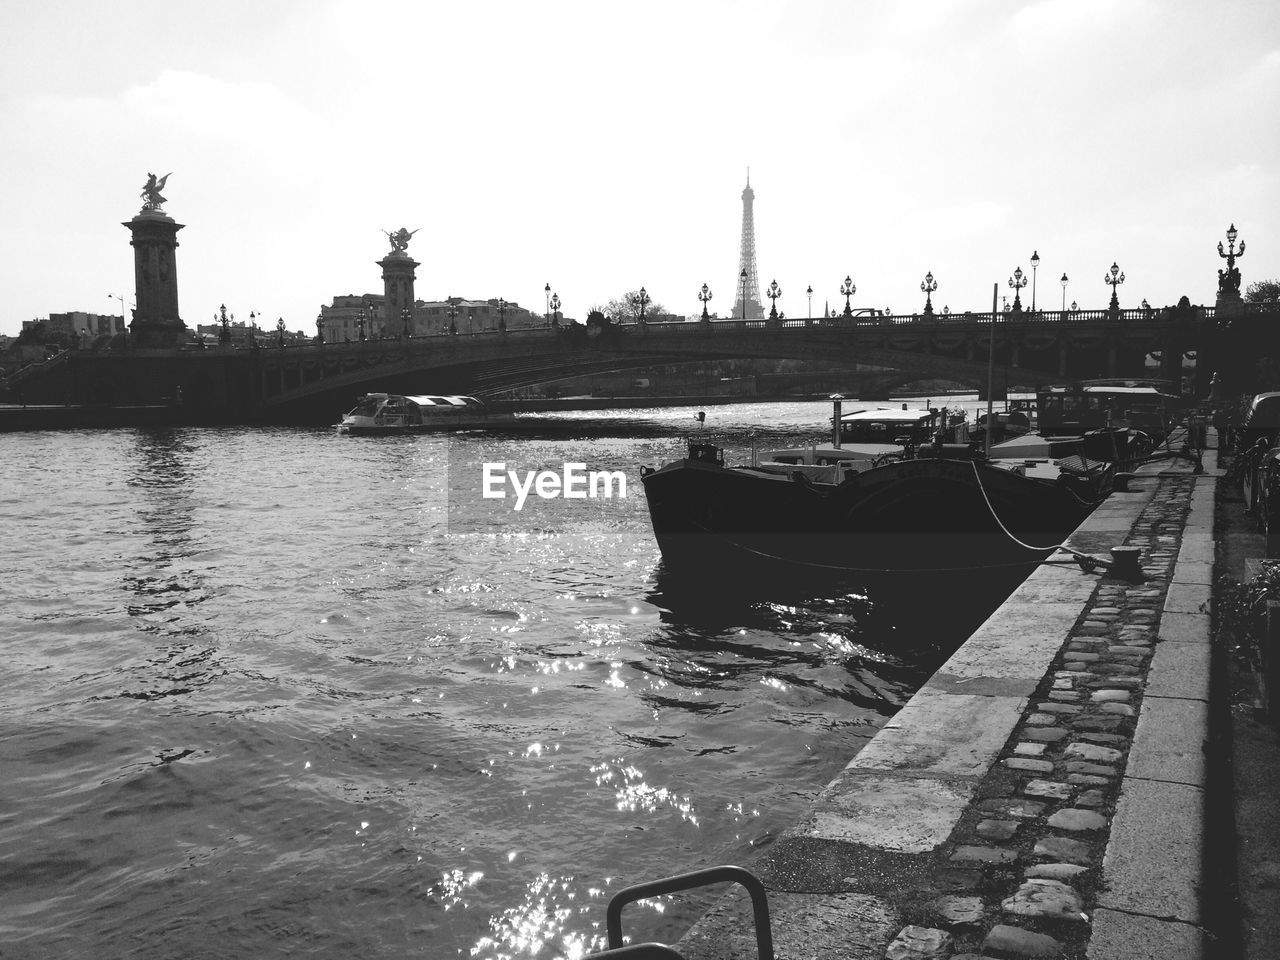 View of river and eiffel tower in background